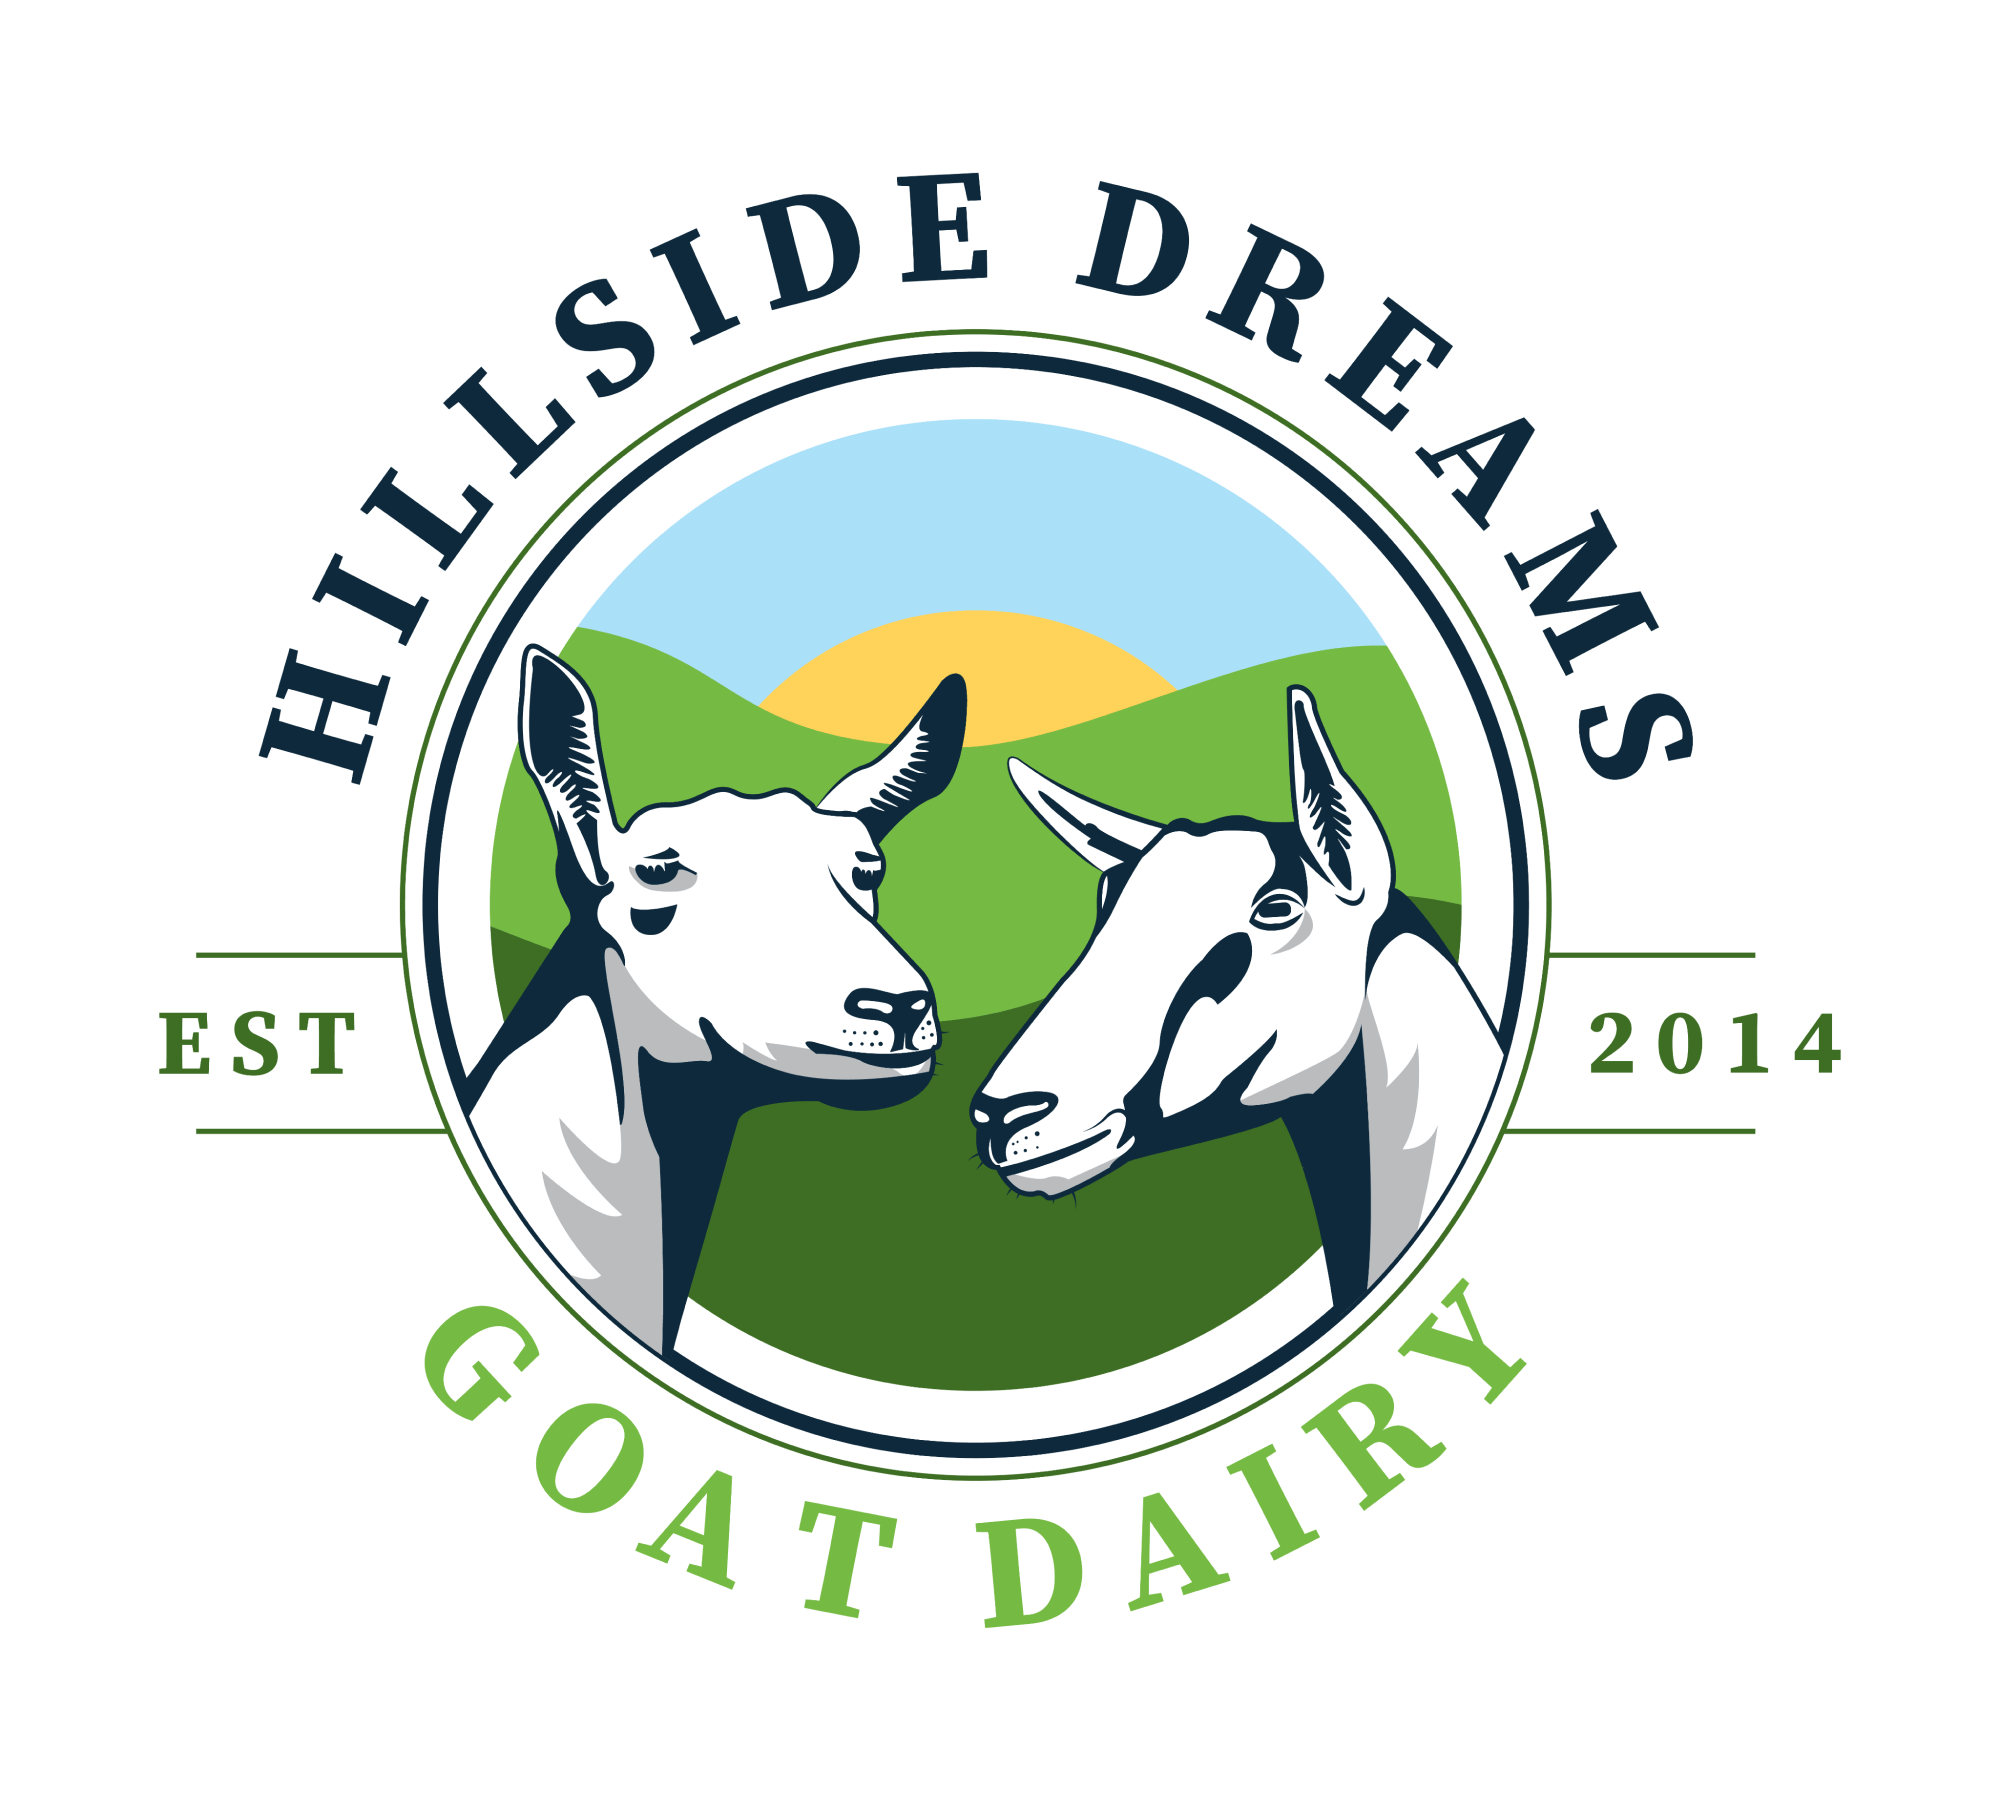 Vintage style farm logo that features two goats